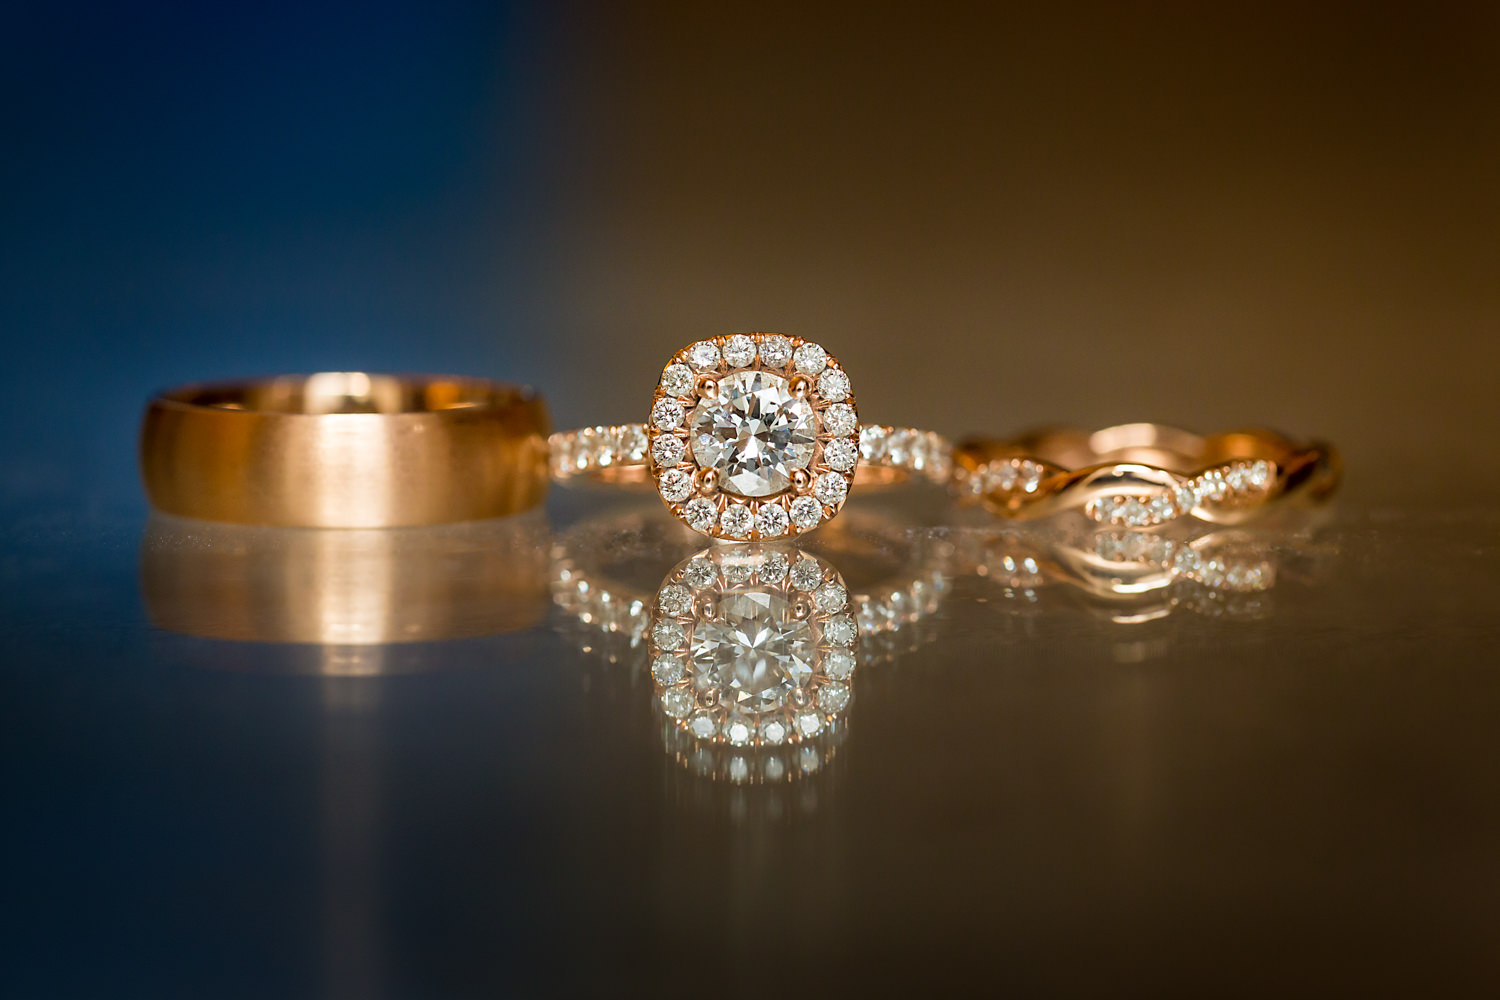 this photo is a wedding ring shot, the rose gold rings and their reflection are simple but beautiful, Procopio Photography, best top Washington DC photographer, best top Maryland photographer, best top Virginia photographer, best top DMV photographer, best top wedding photographer, best top commercial photographer, best top portrait photographer, best top boudoir photographer, modern fine art portraits, dramatic, unique, different, bold, editorial, photojournalism, award winning photographer, published photographer, memorable images, be different, stand out